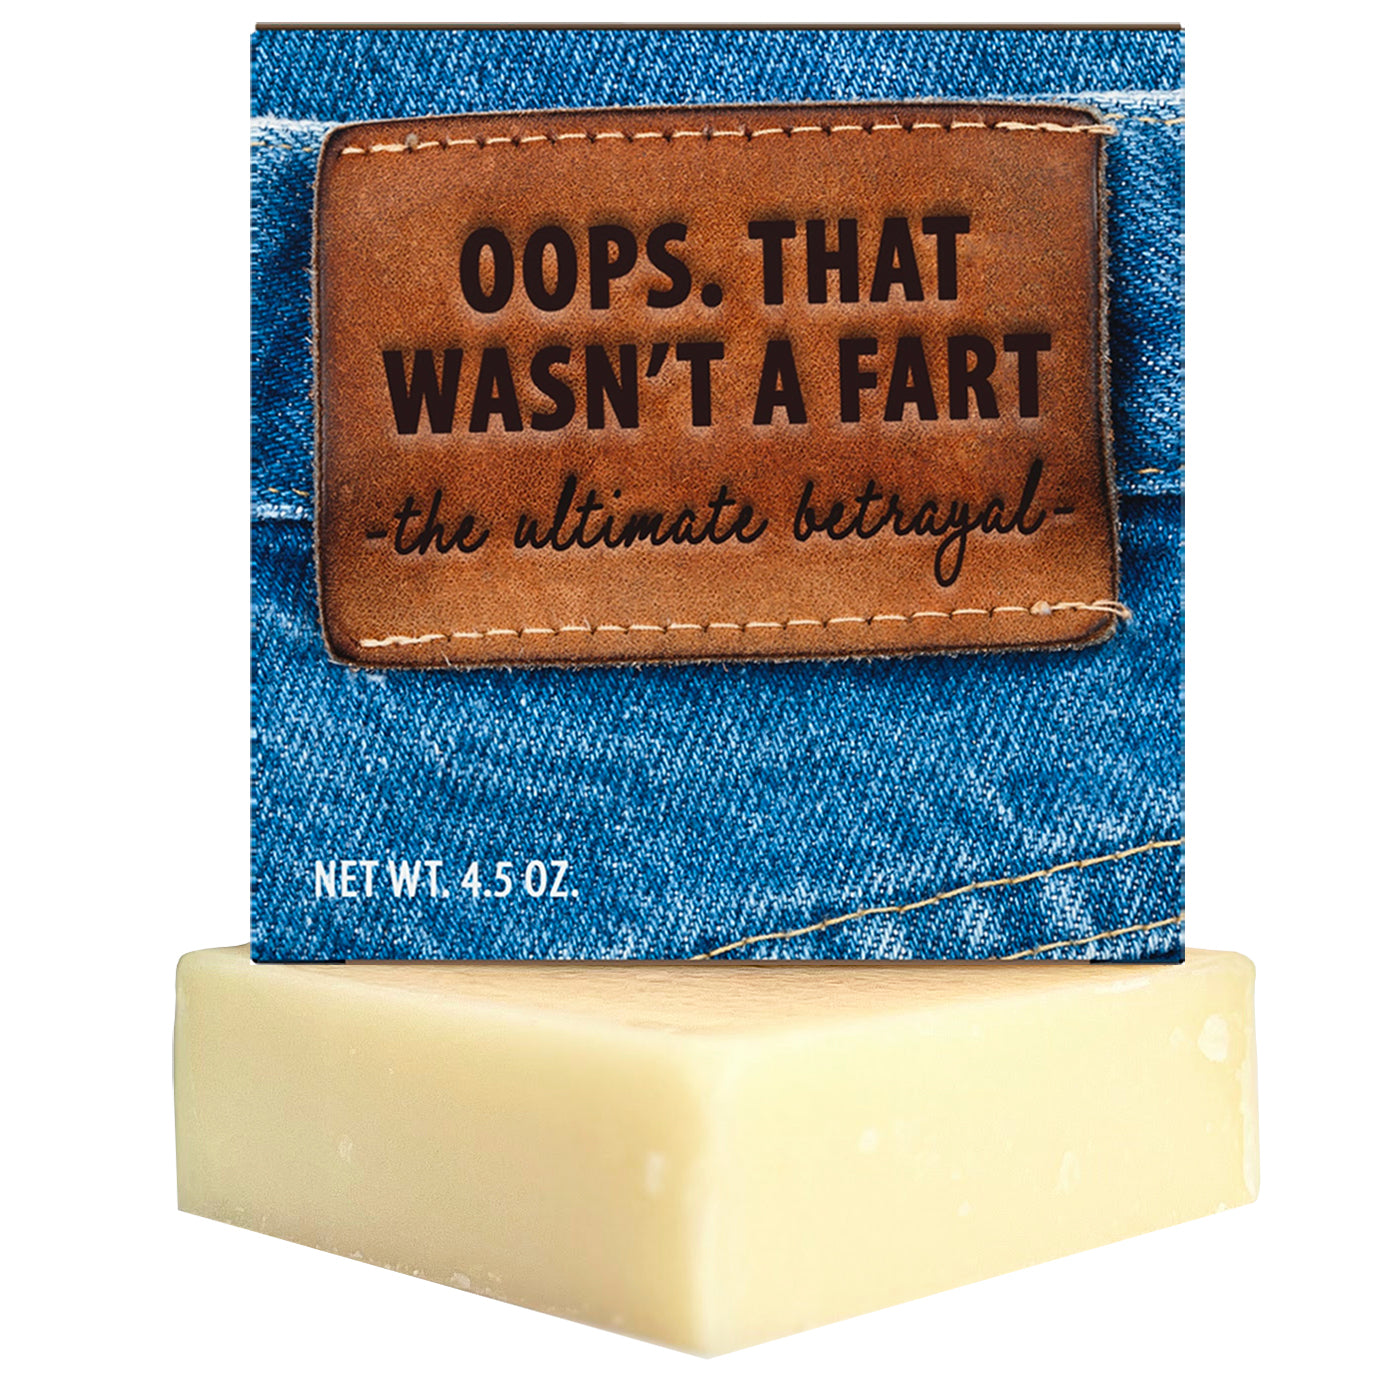 Funny Soap - Oops That Wasn't A Fart Soap